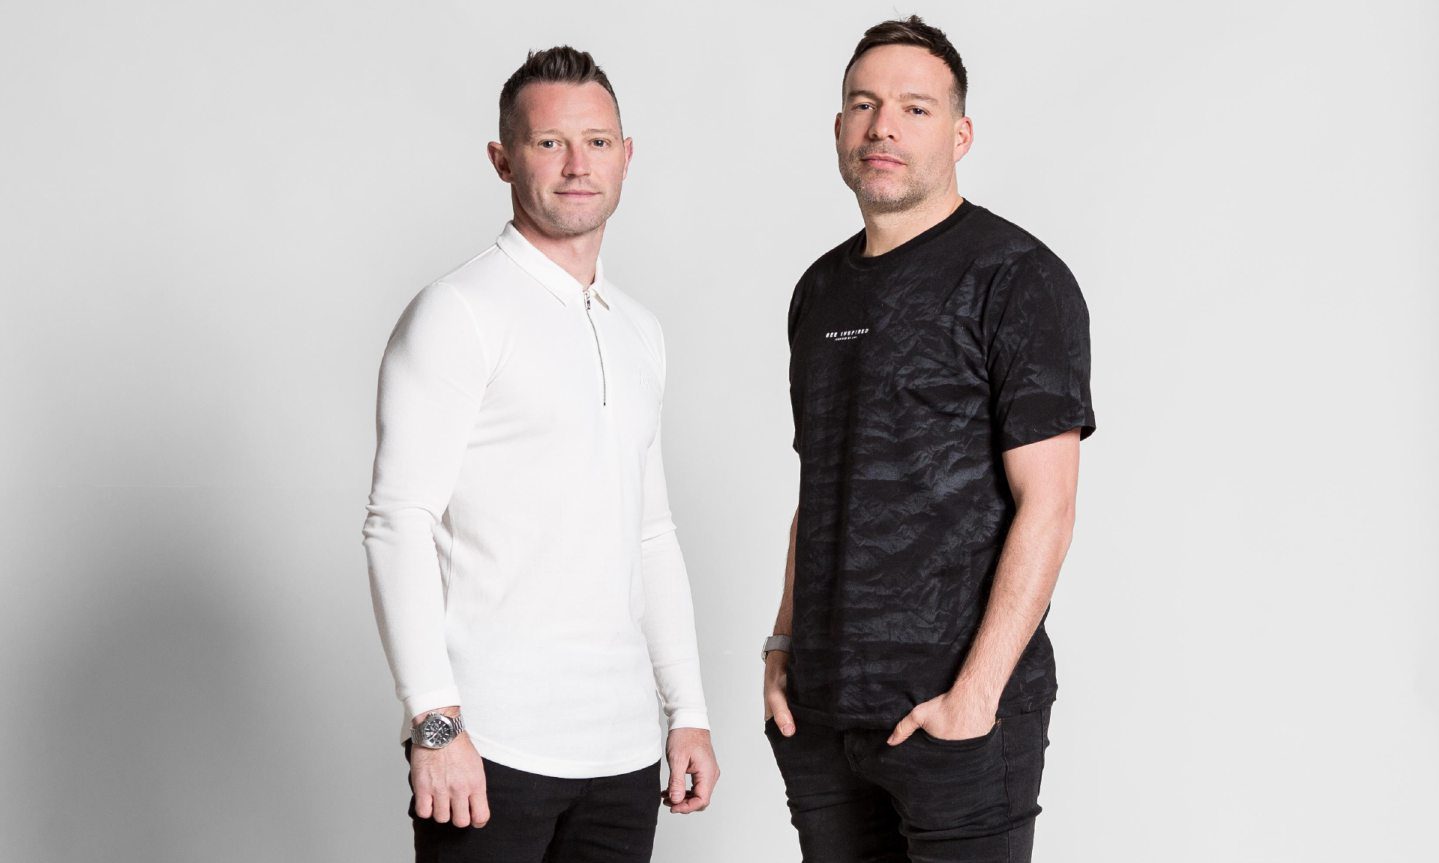 Footballers Mark Corcoran and Steven Robb of fashion firm Bee Inspired. Image: Bee Inspired